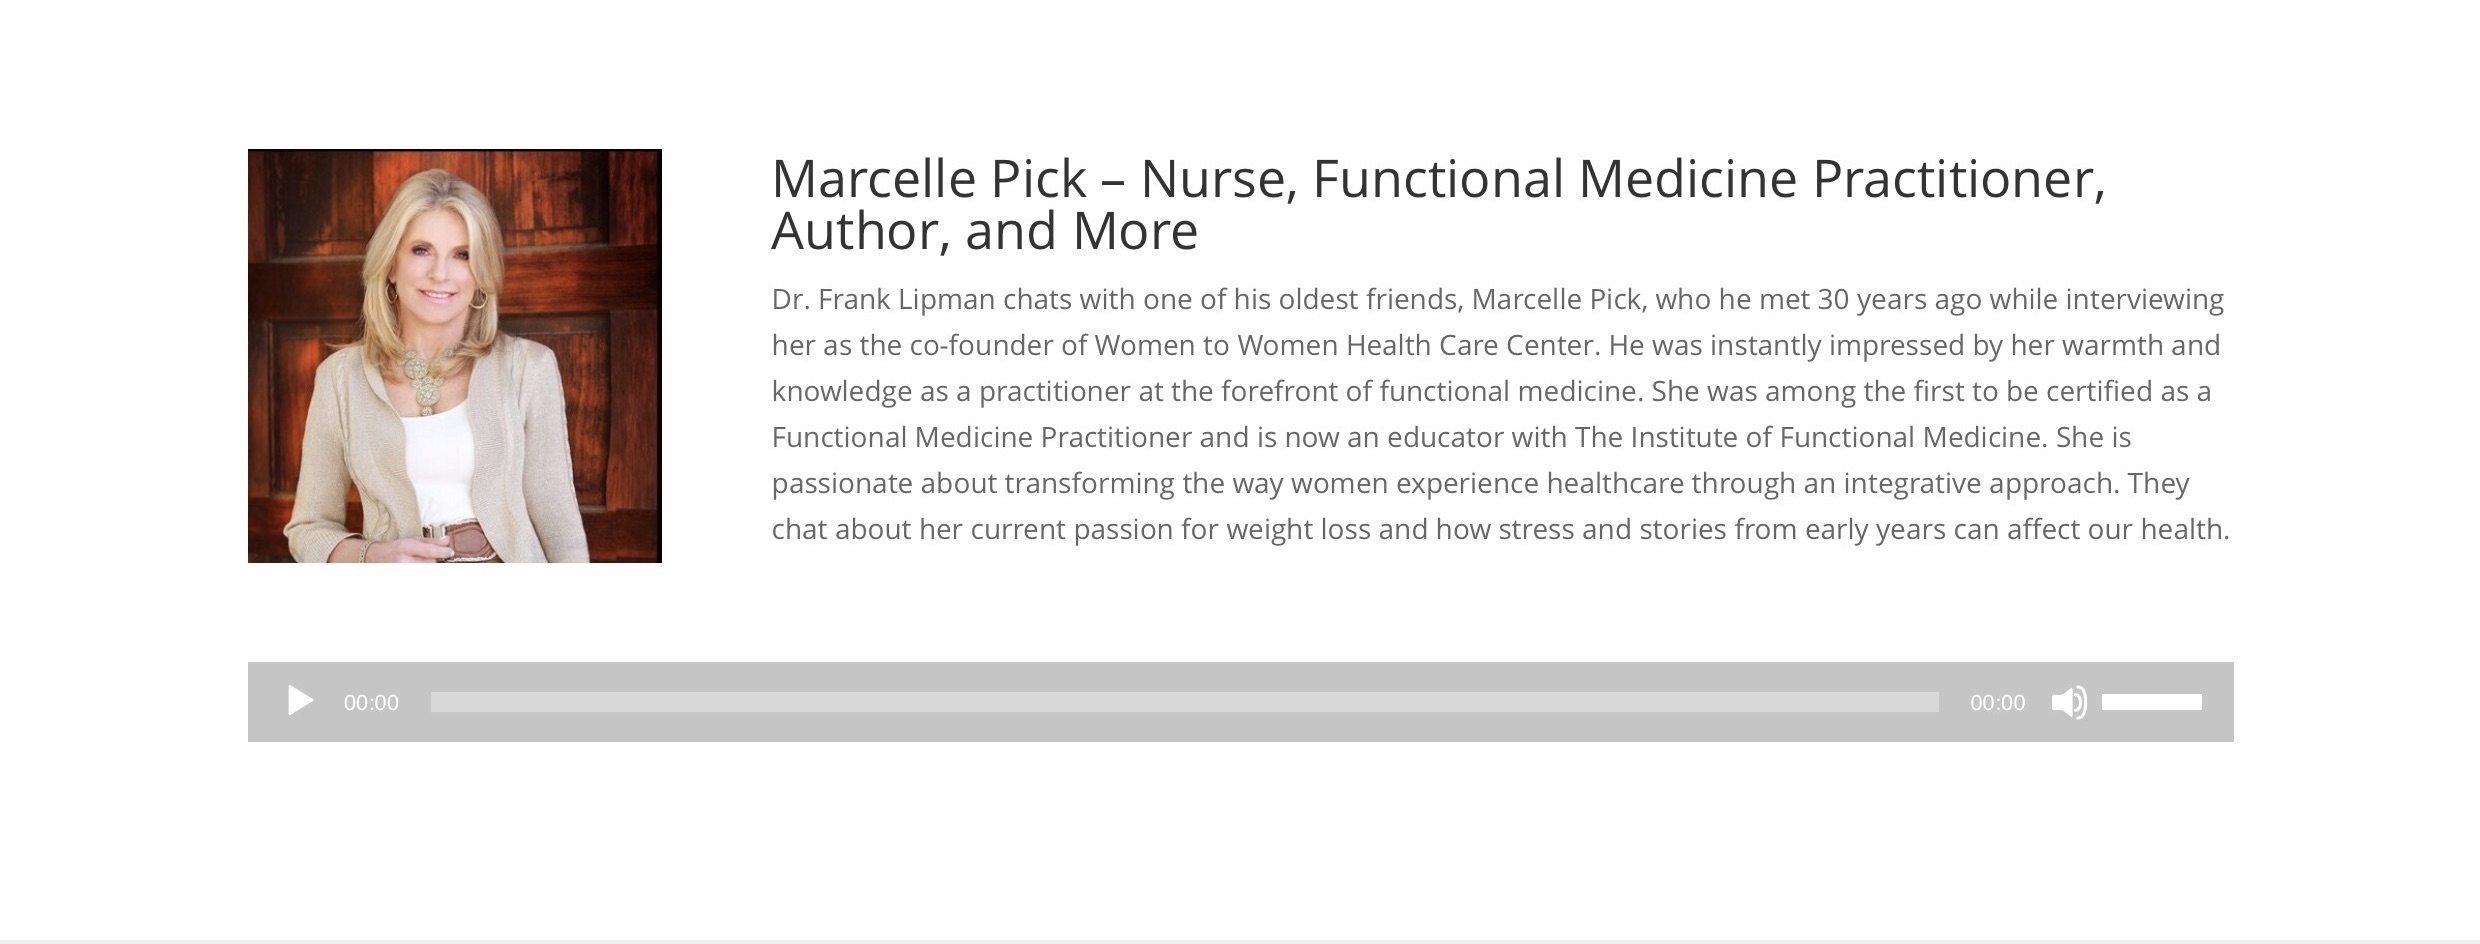 Dr. Frank Lipman Podcast with Marcelle Pick